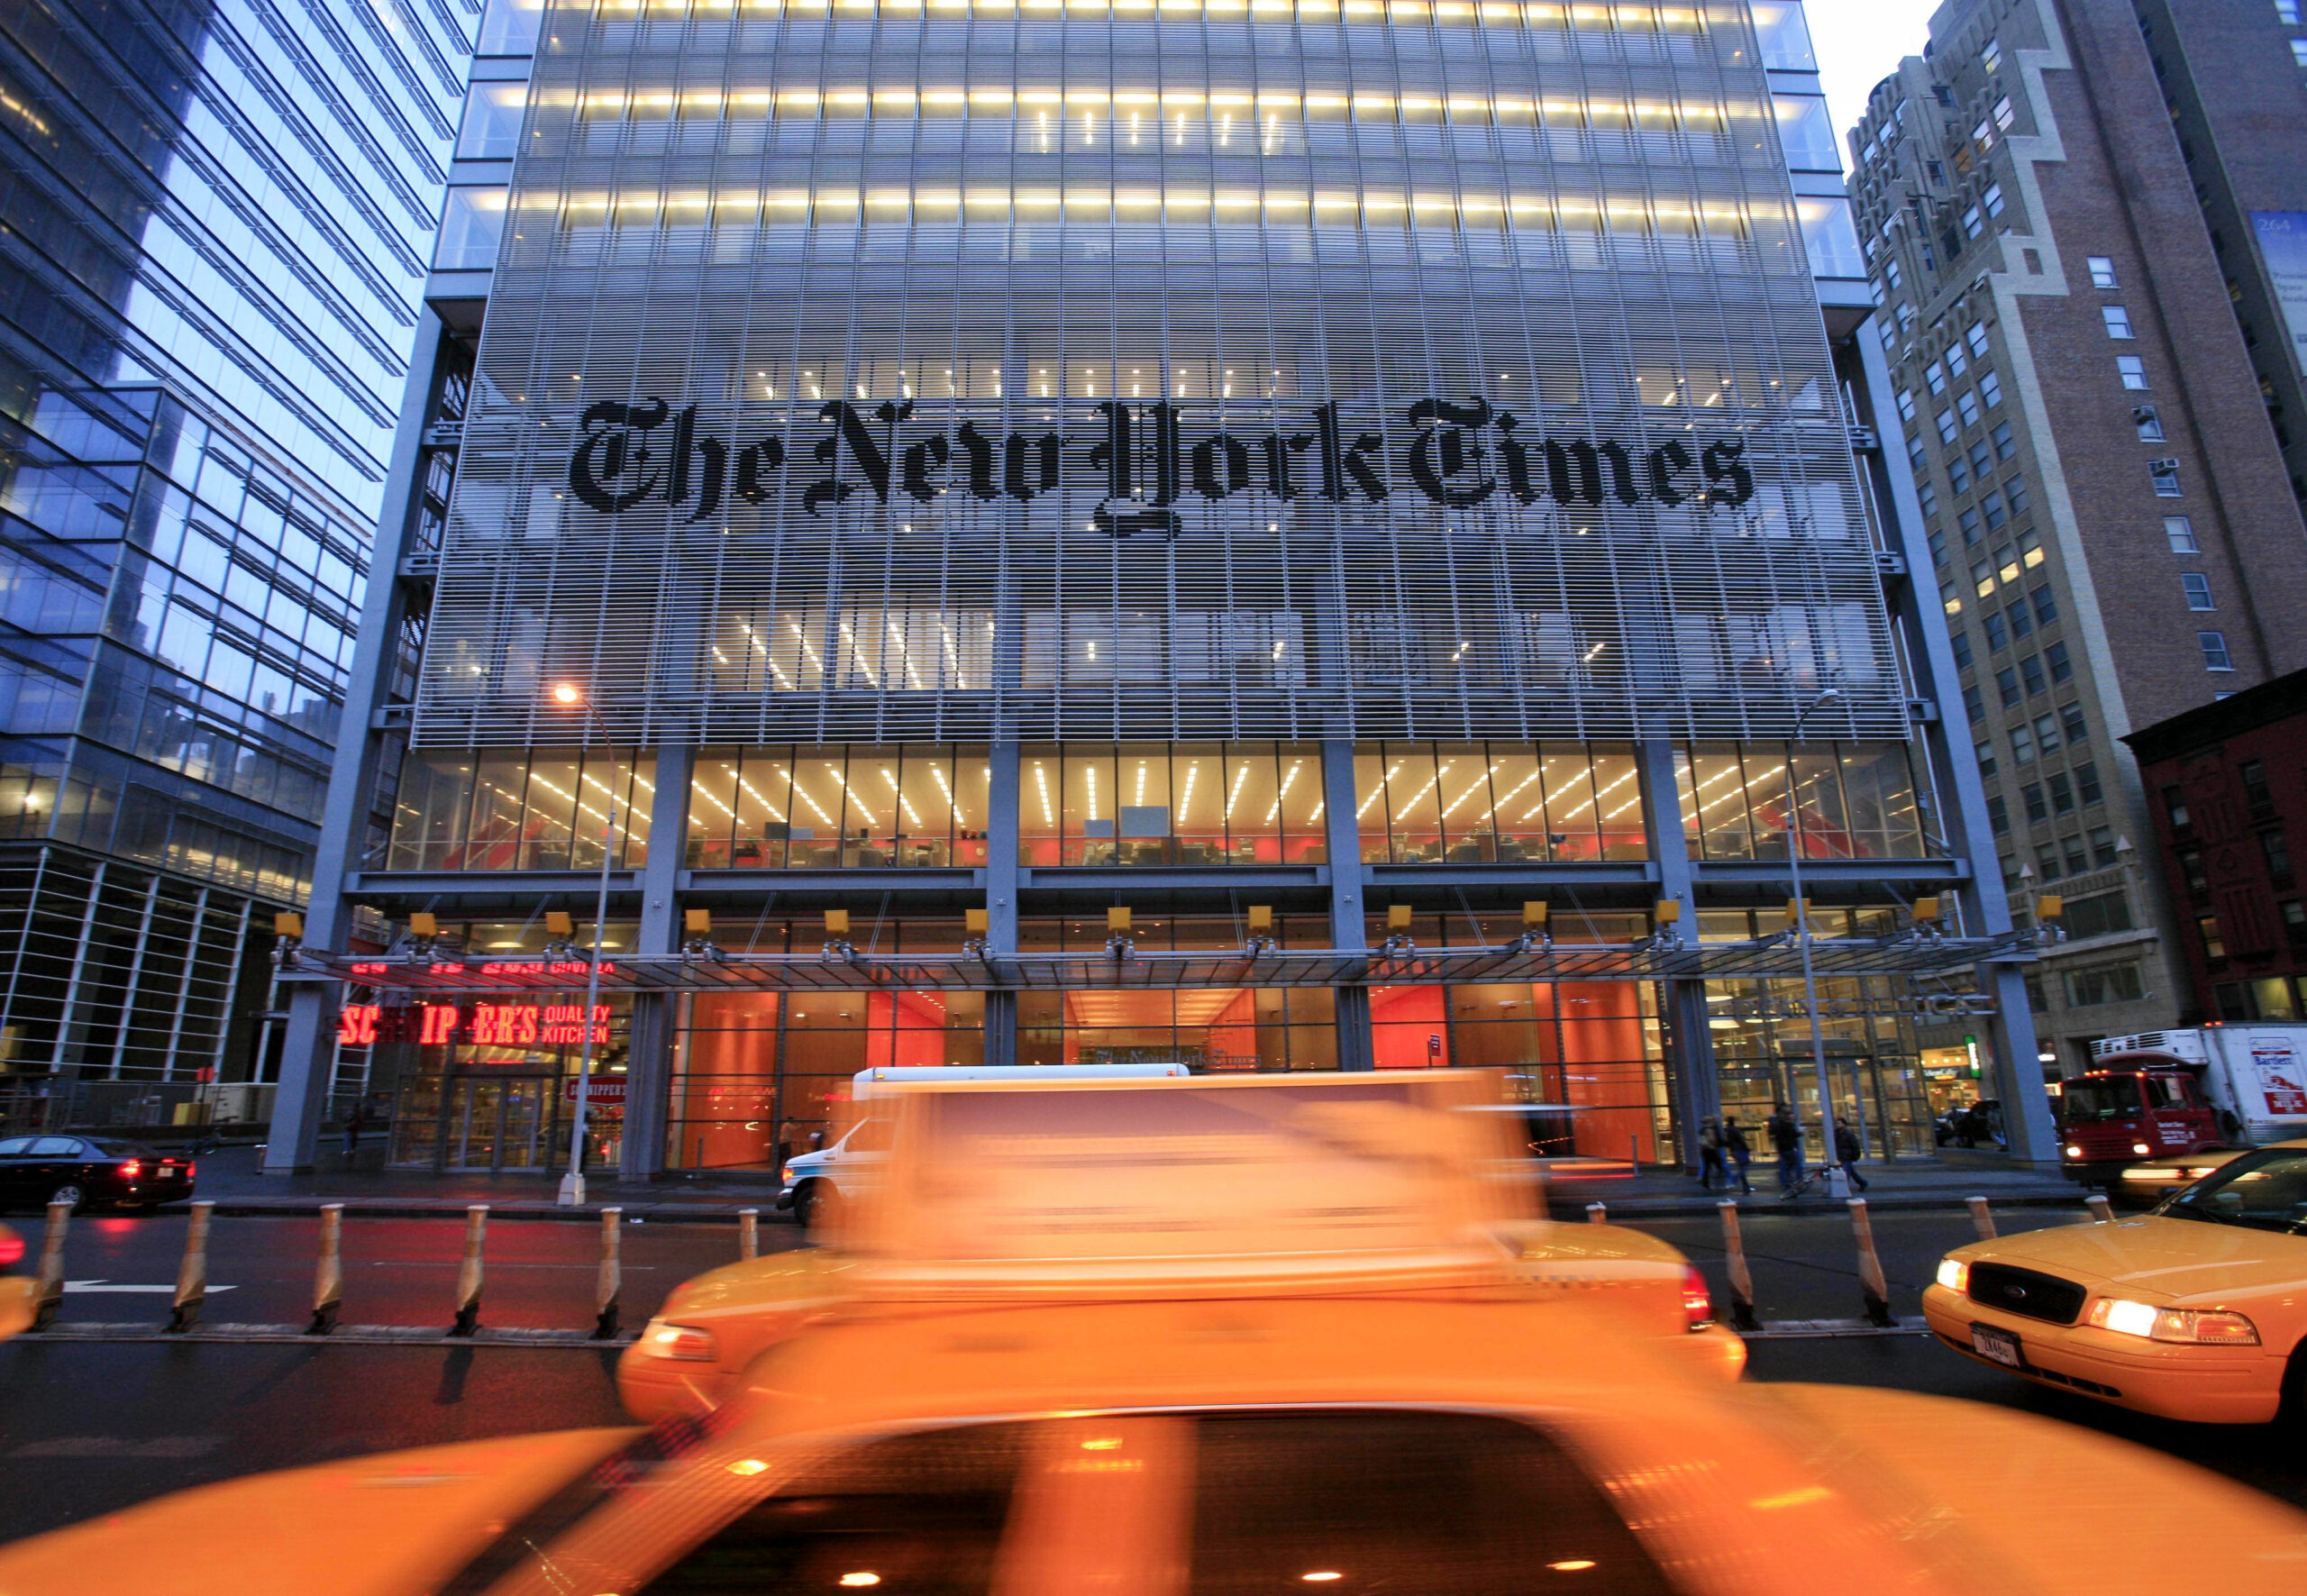 New York Times Reporter ‘Spat On’ in Public By Person Enraged By Paper’s Trans Coverage